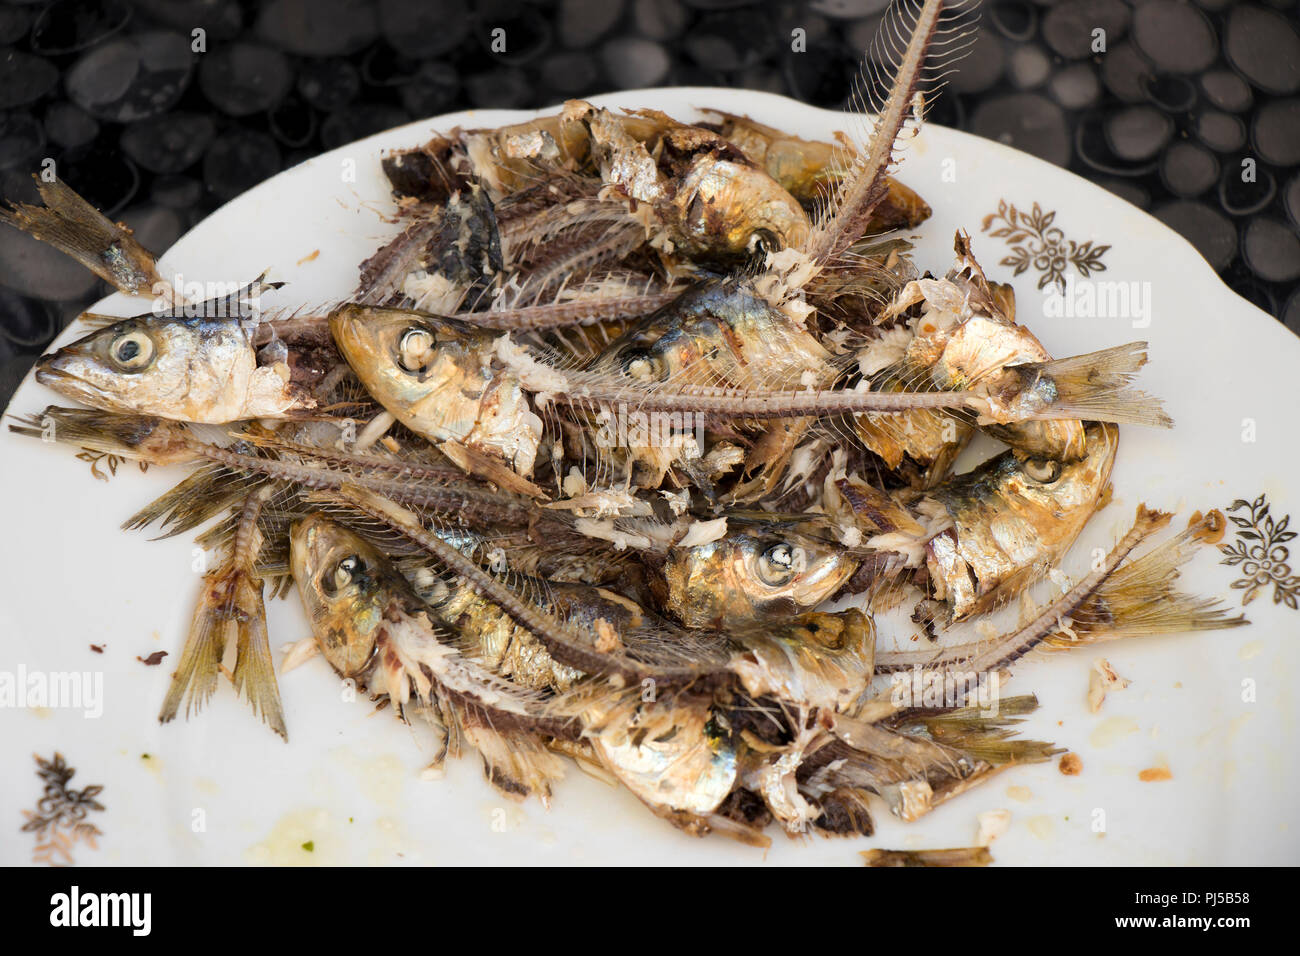 Dozen of home prepared eaten grilled sardines heads and bones on a plate, very healthy, tasty and cheap Mediterranean fish , a rich meal for the poor Stock Photo